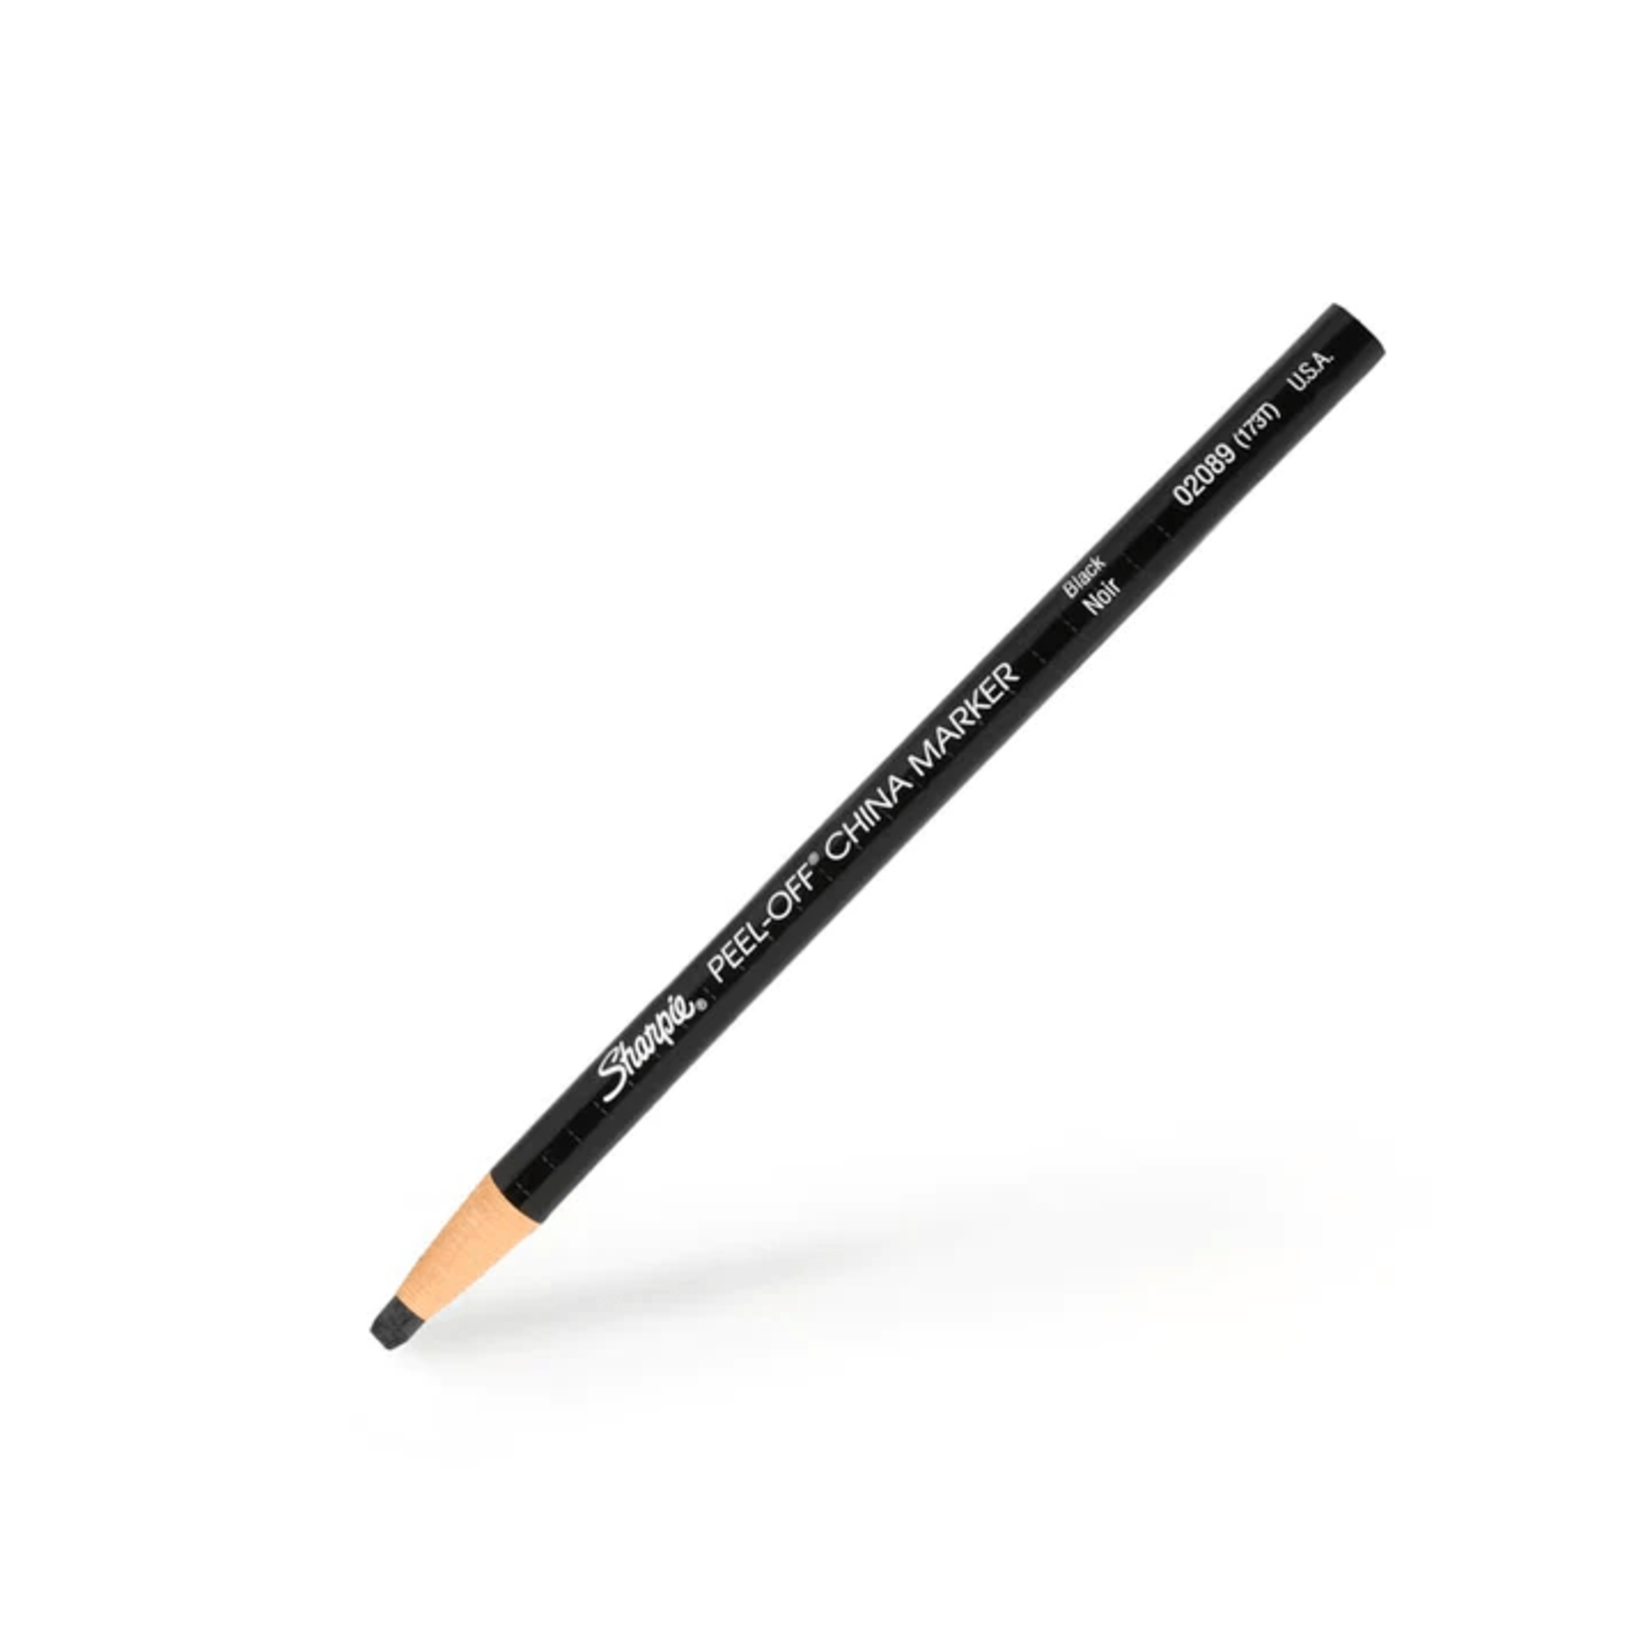 SHARPIE MAPPING PENCIL - BLACK